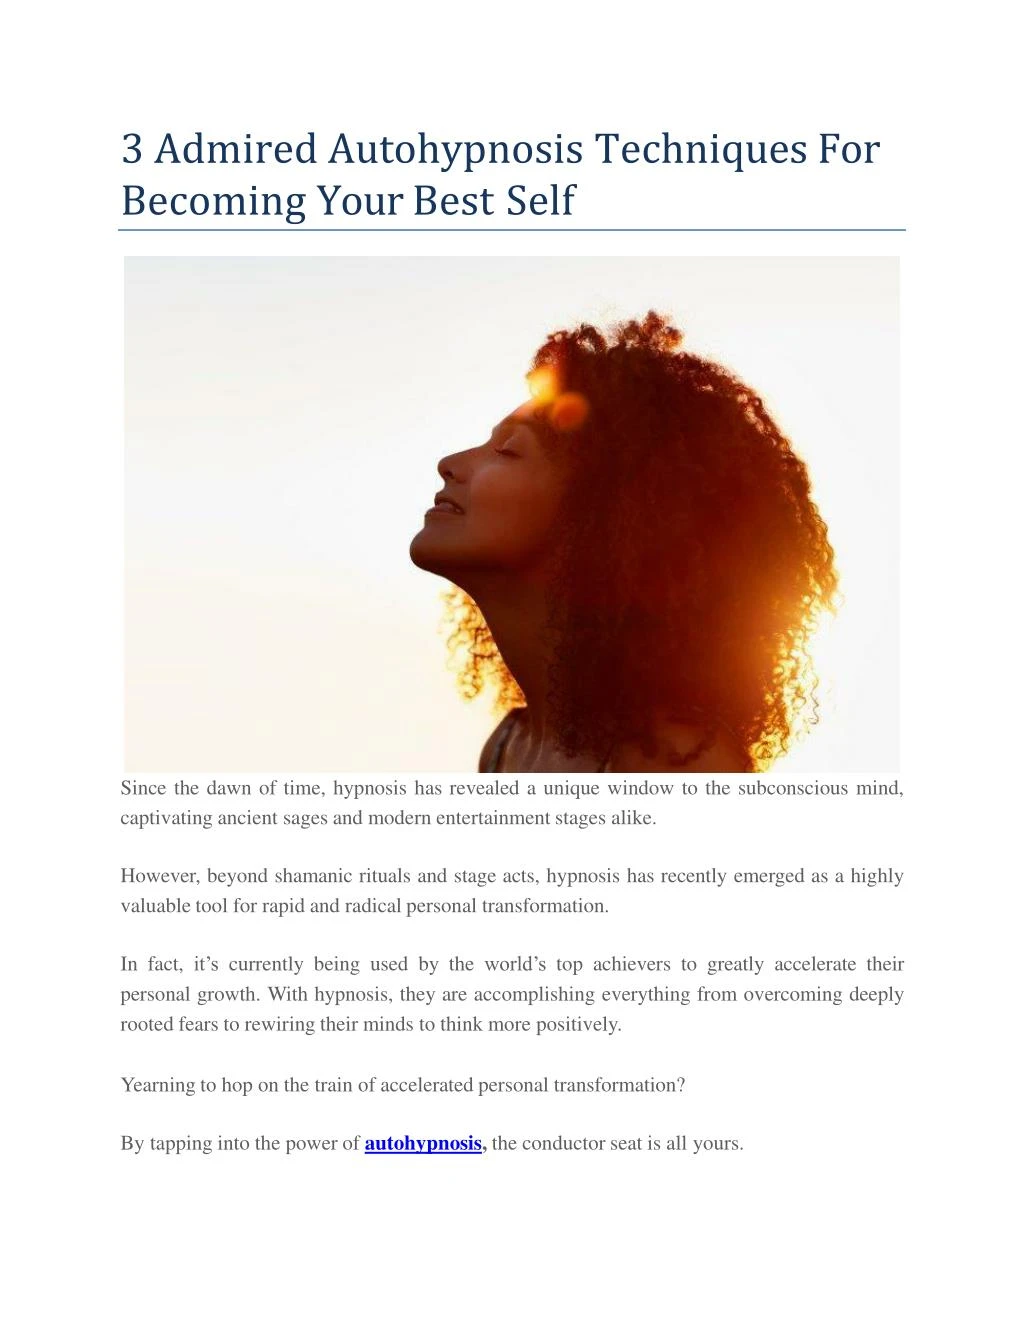 3 admired autohypnosis techniques for becoming your best self